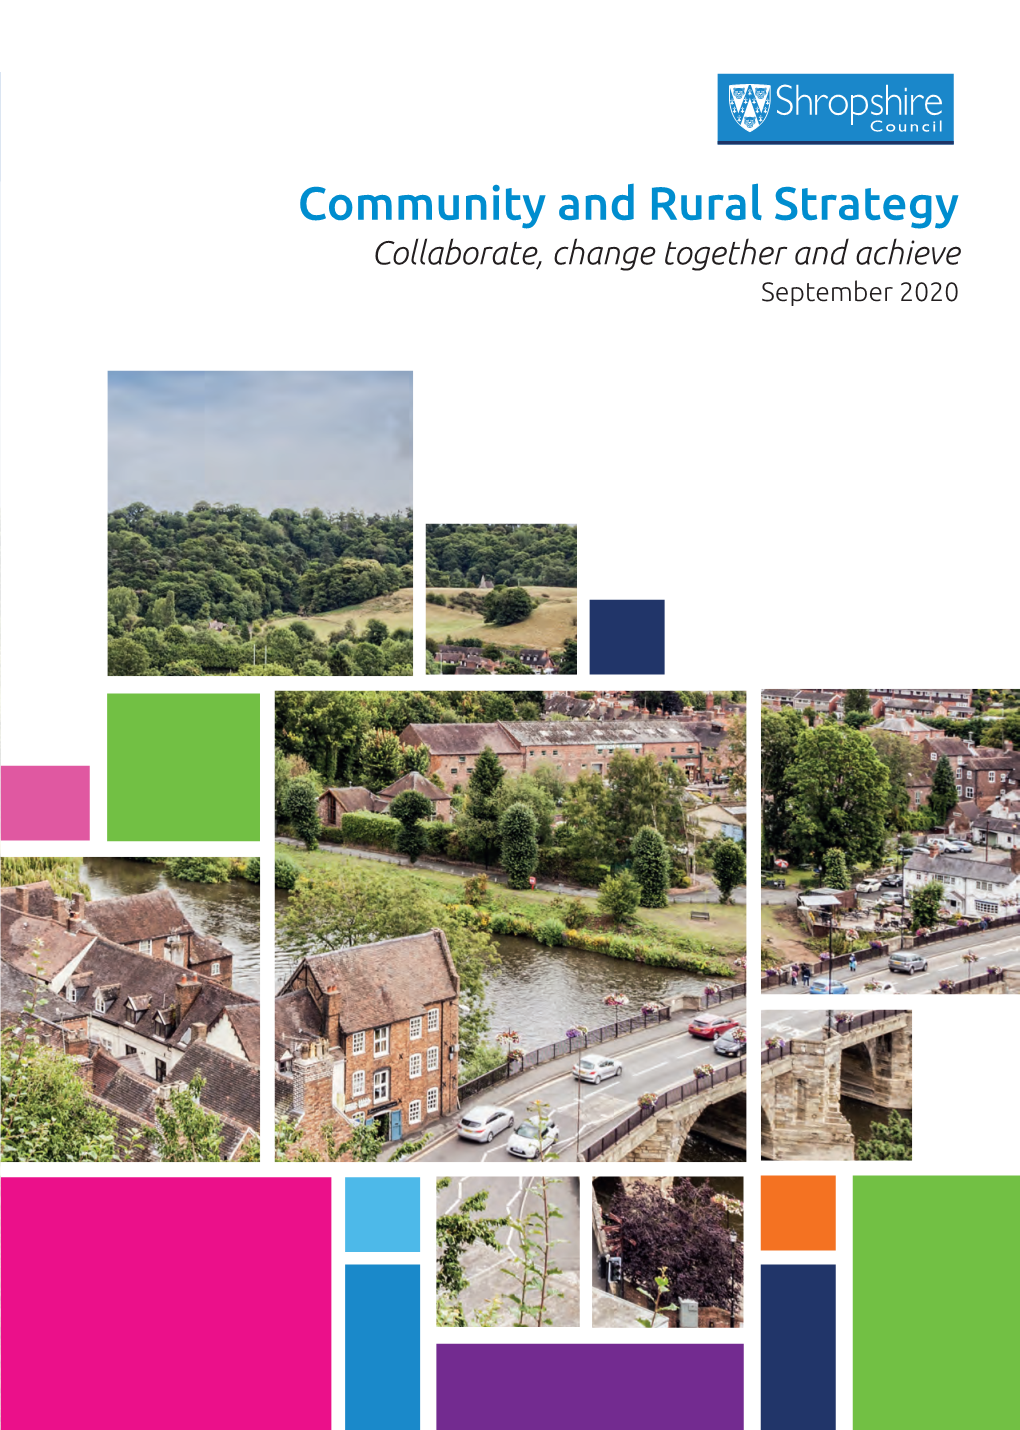 Community and Rural Strategy Collaborate, Change Together and Achieve September 2020 Shropshire Council Community and Rural Strategy September 2020